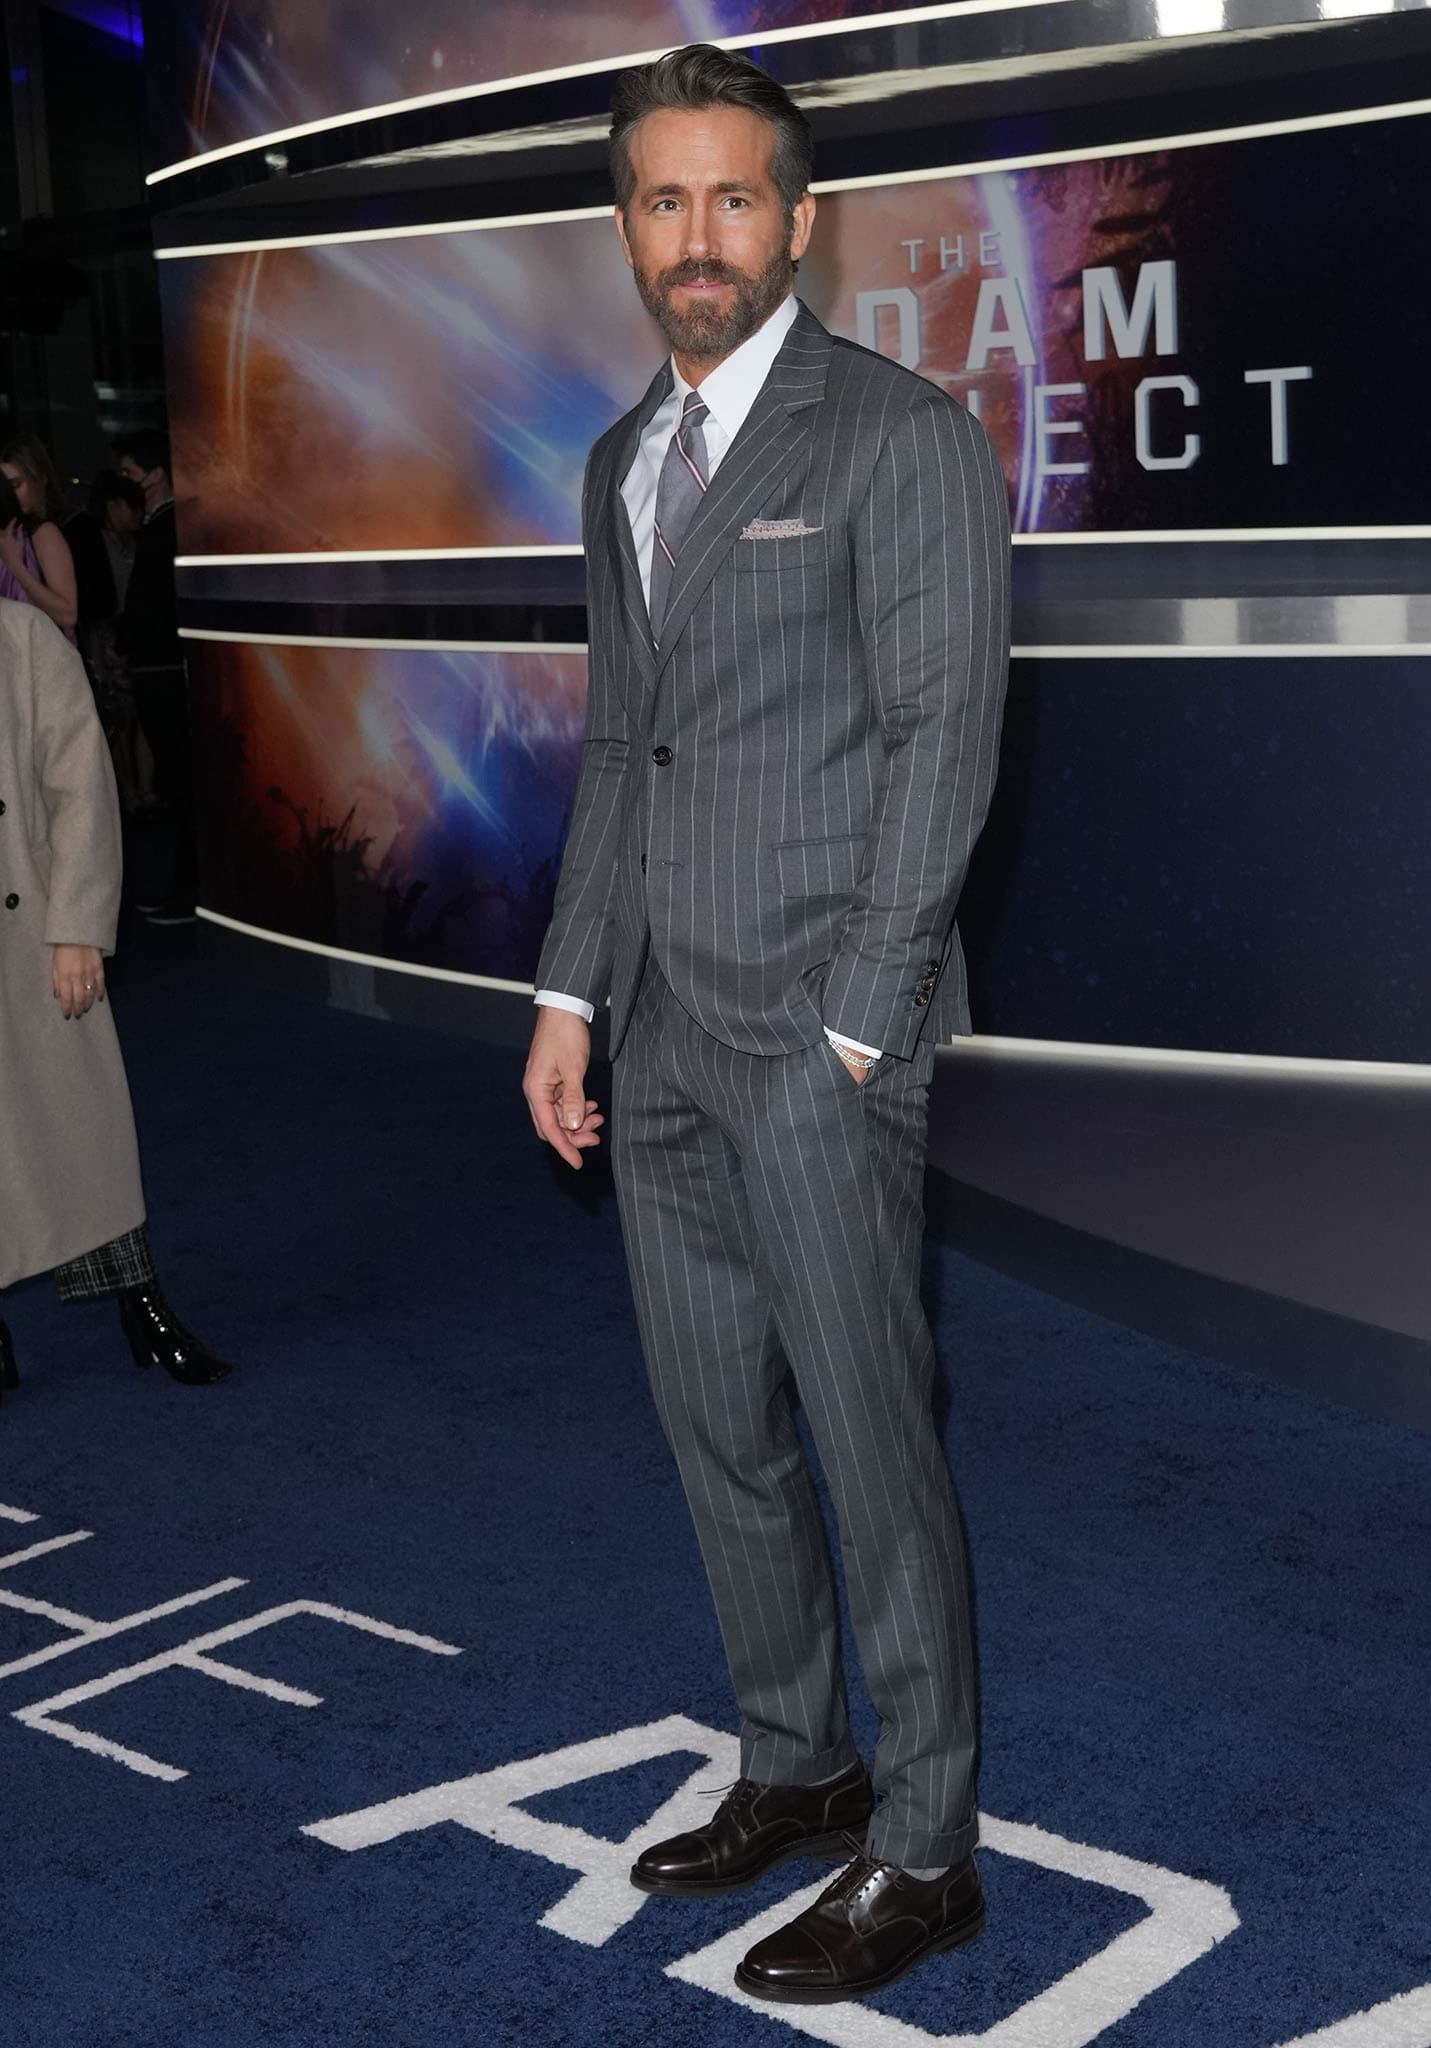 Ryan Reynolds looks dashing in his charcoal pinstriped suit and matching tie